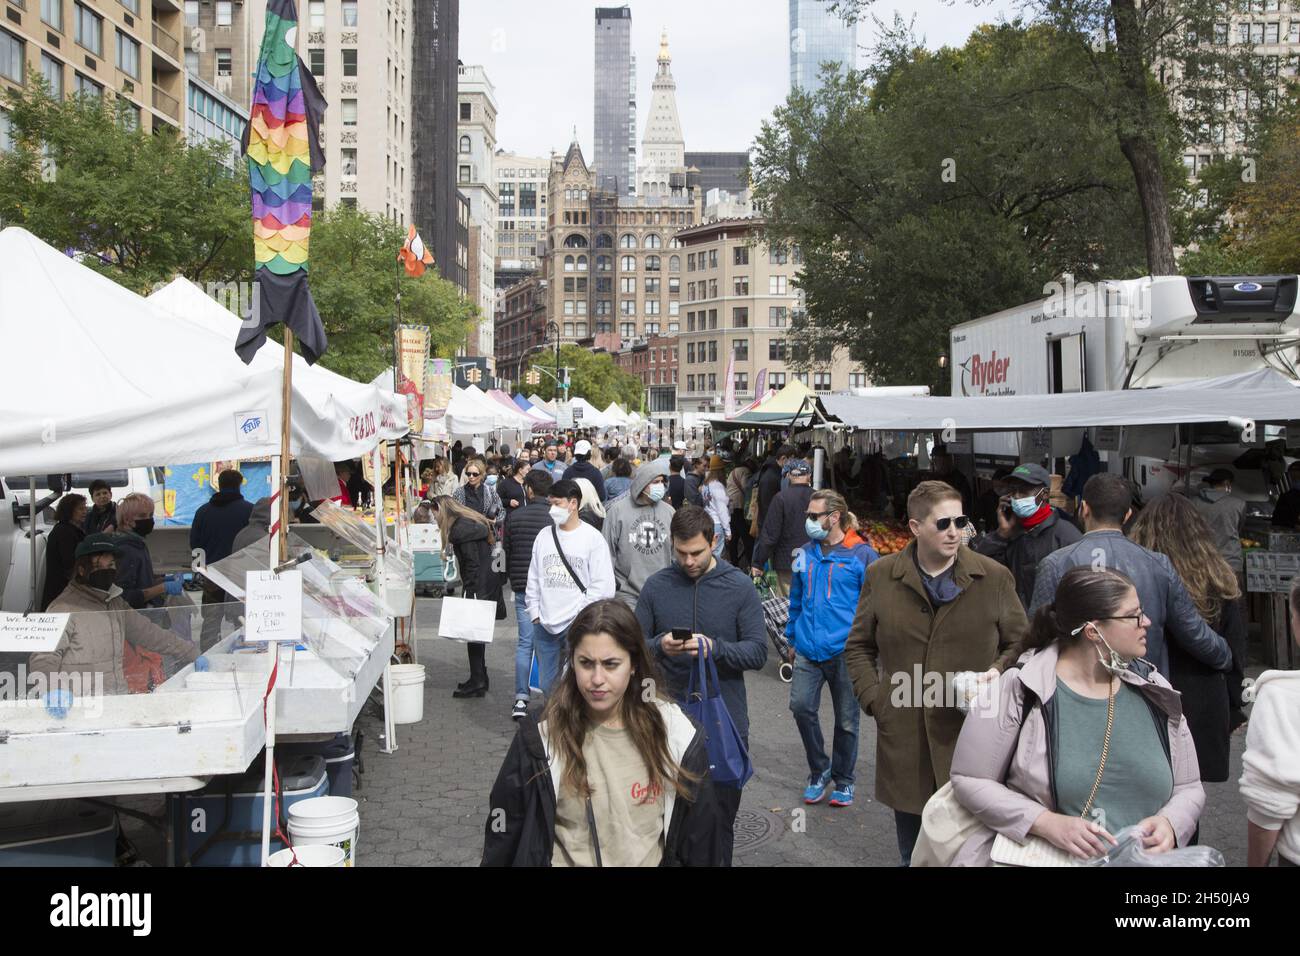 Looking north in the Union Square Farmers Market that is always crowded with shoppers and strollers, NYC. Stock Photo